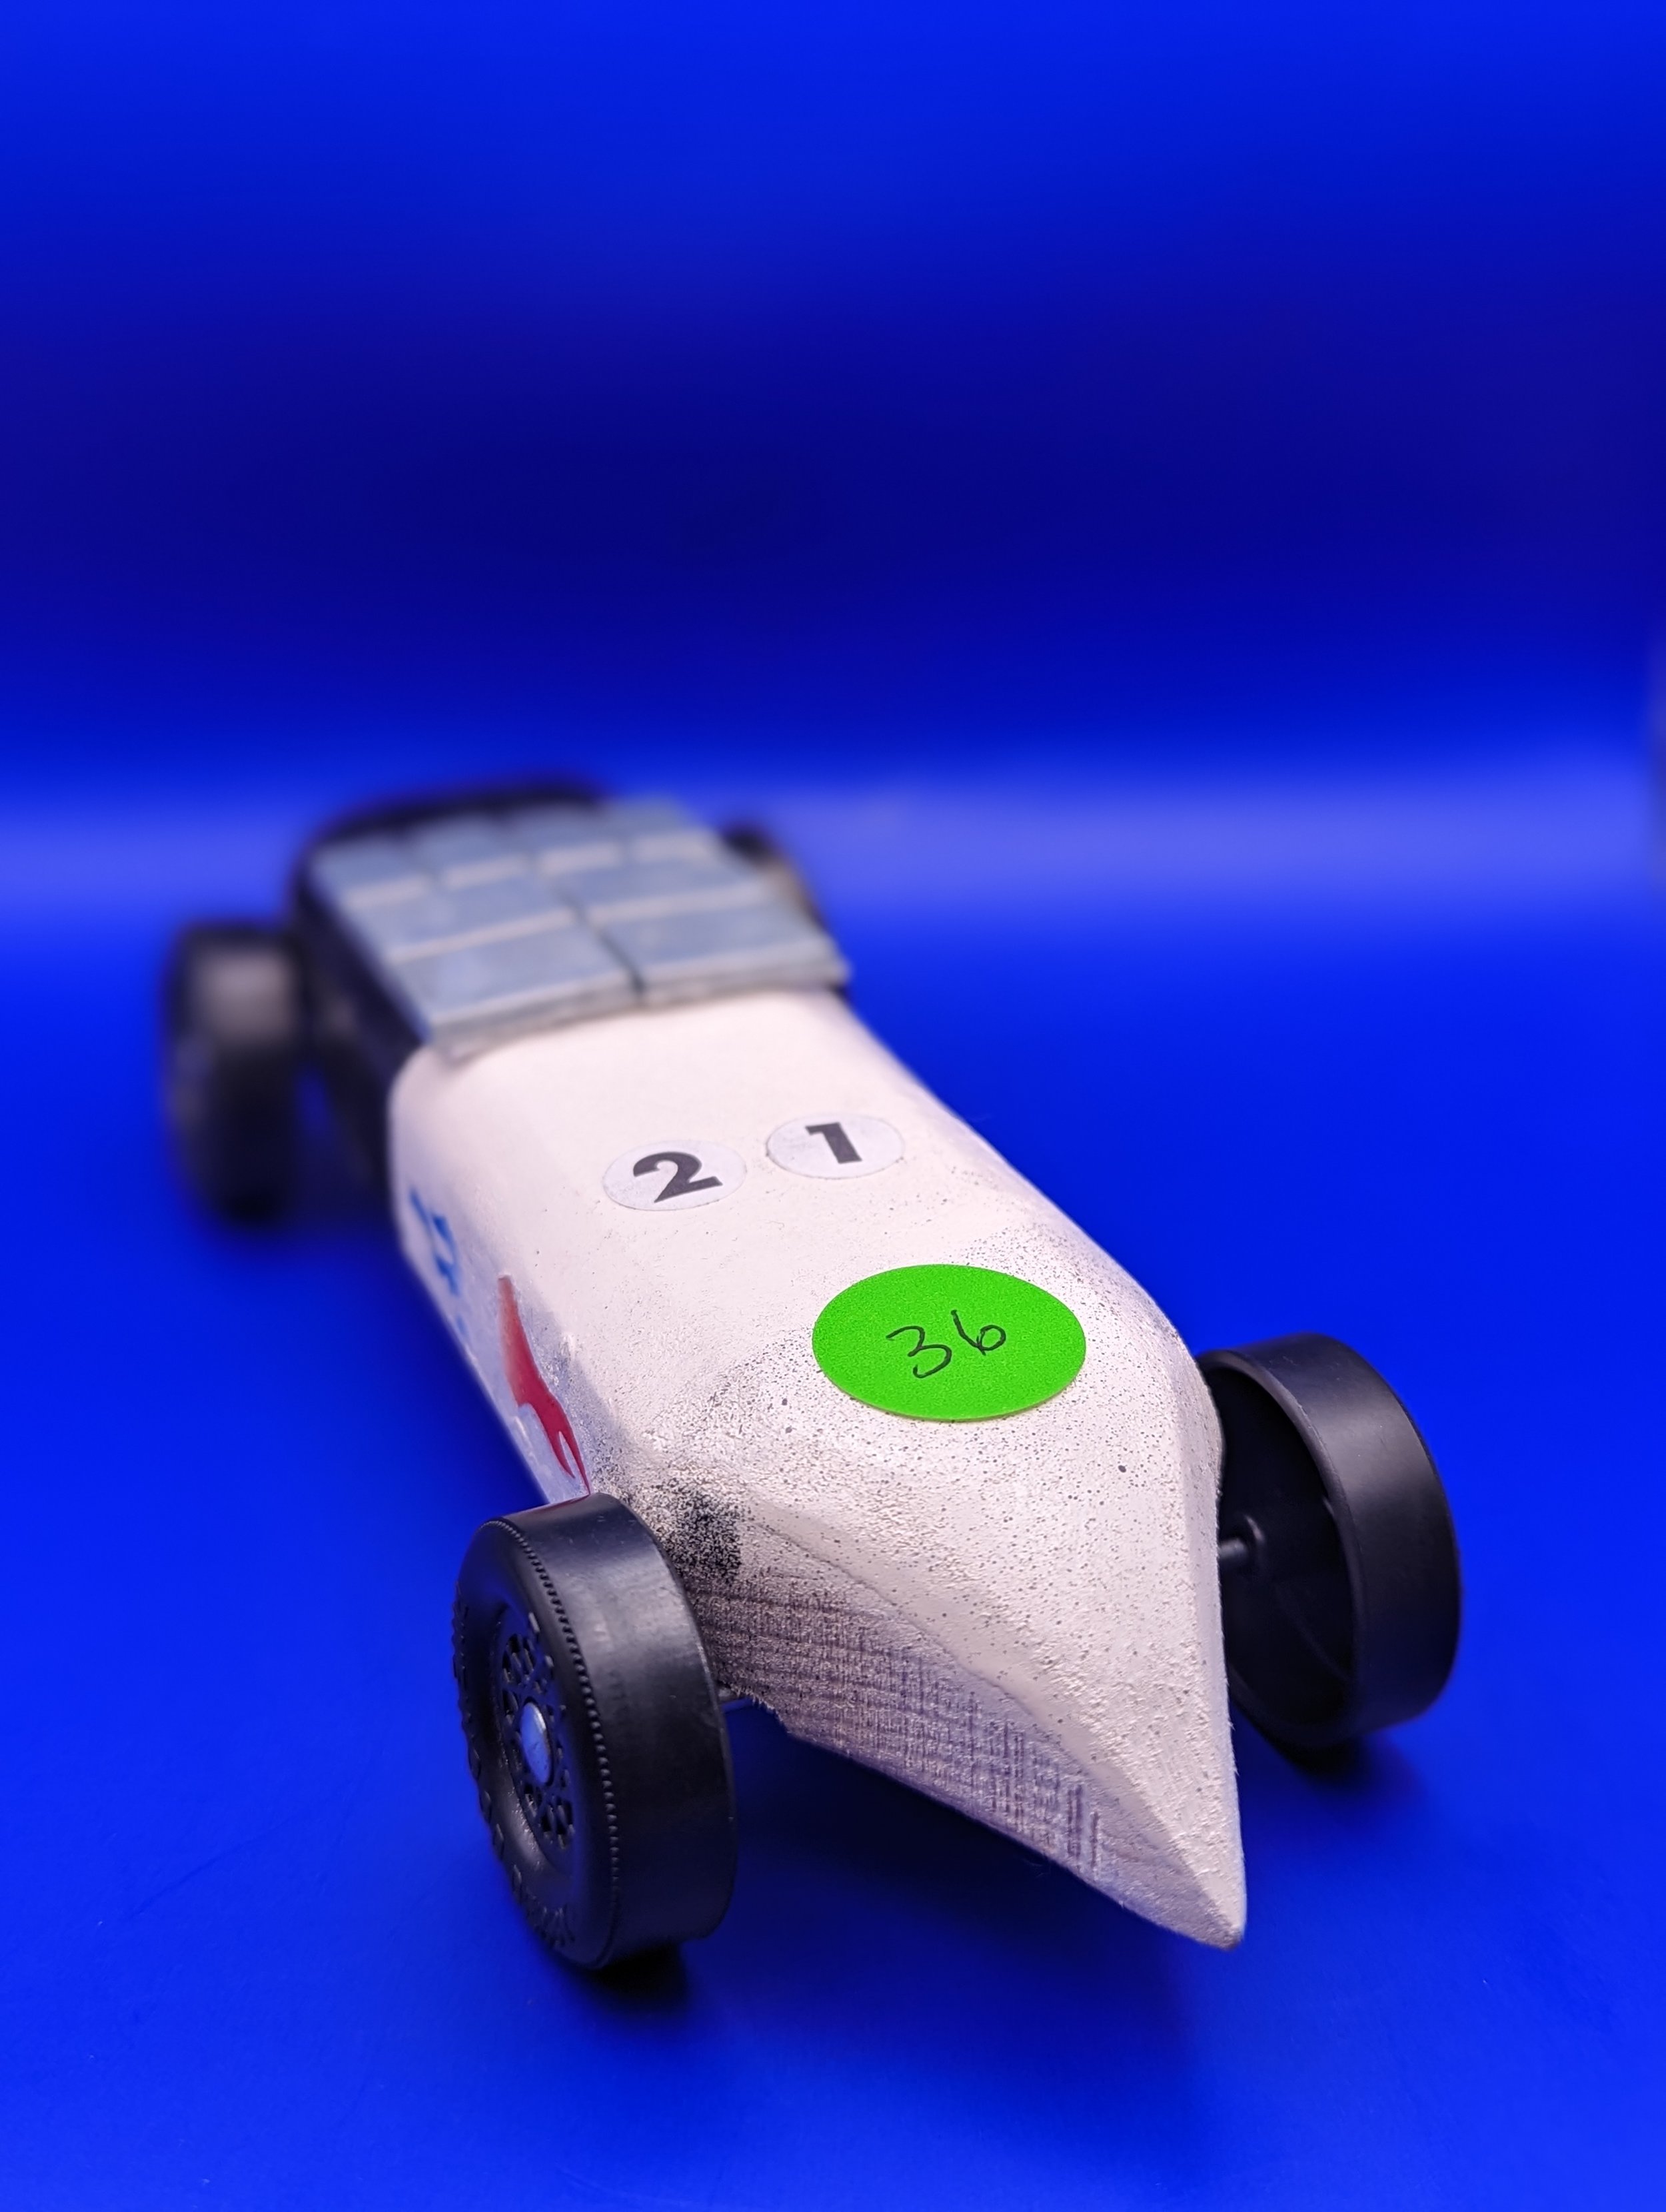 FAST!! Highly Tuned, Race Ready Pinewood Derby Car from Official BSA Boy  Scout / Cub Scout Derby Kit, Legal in ALL Races